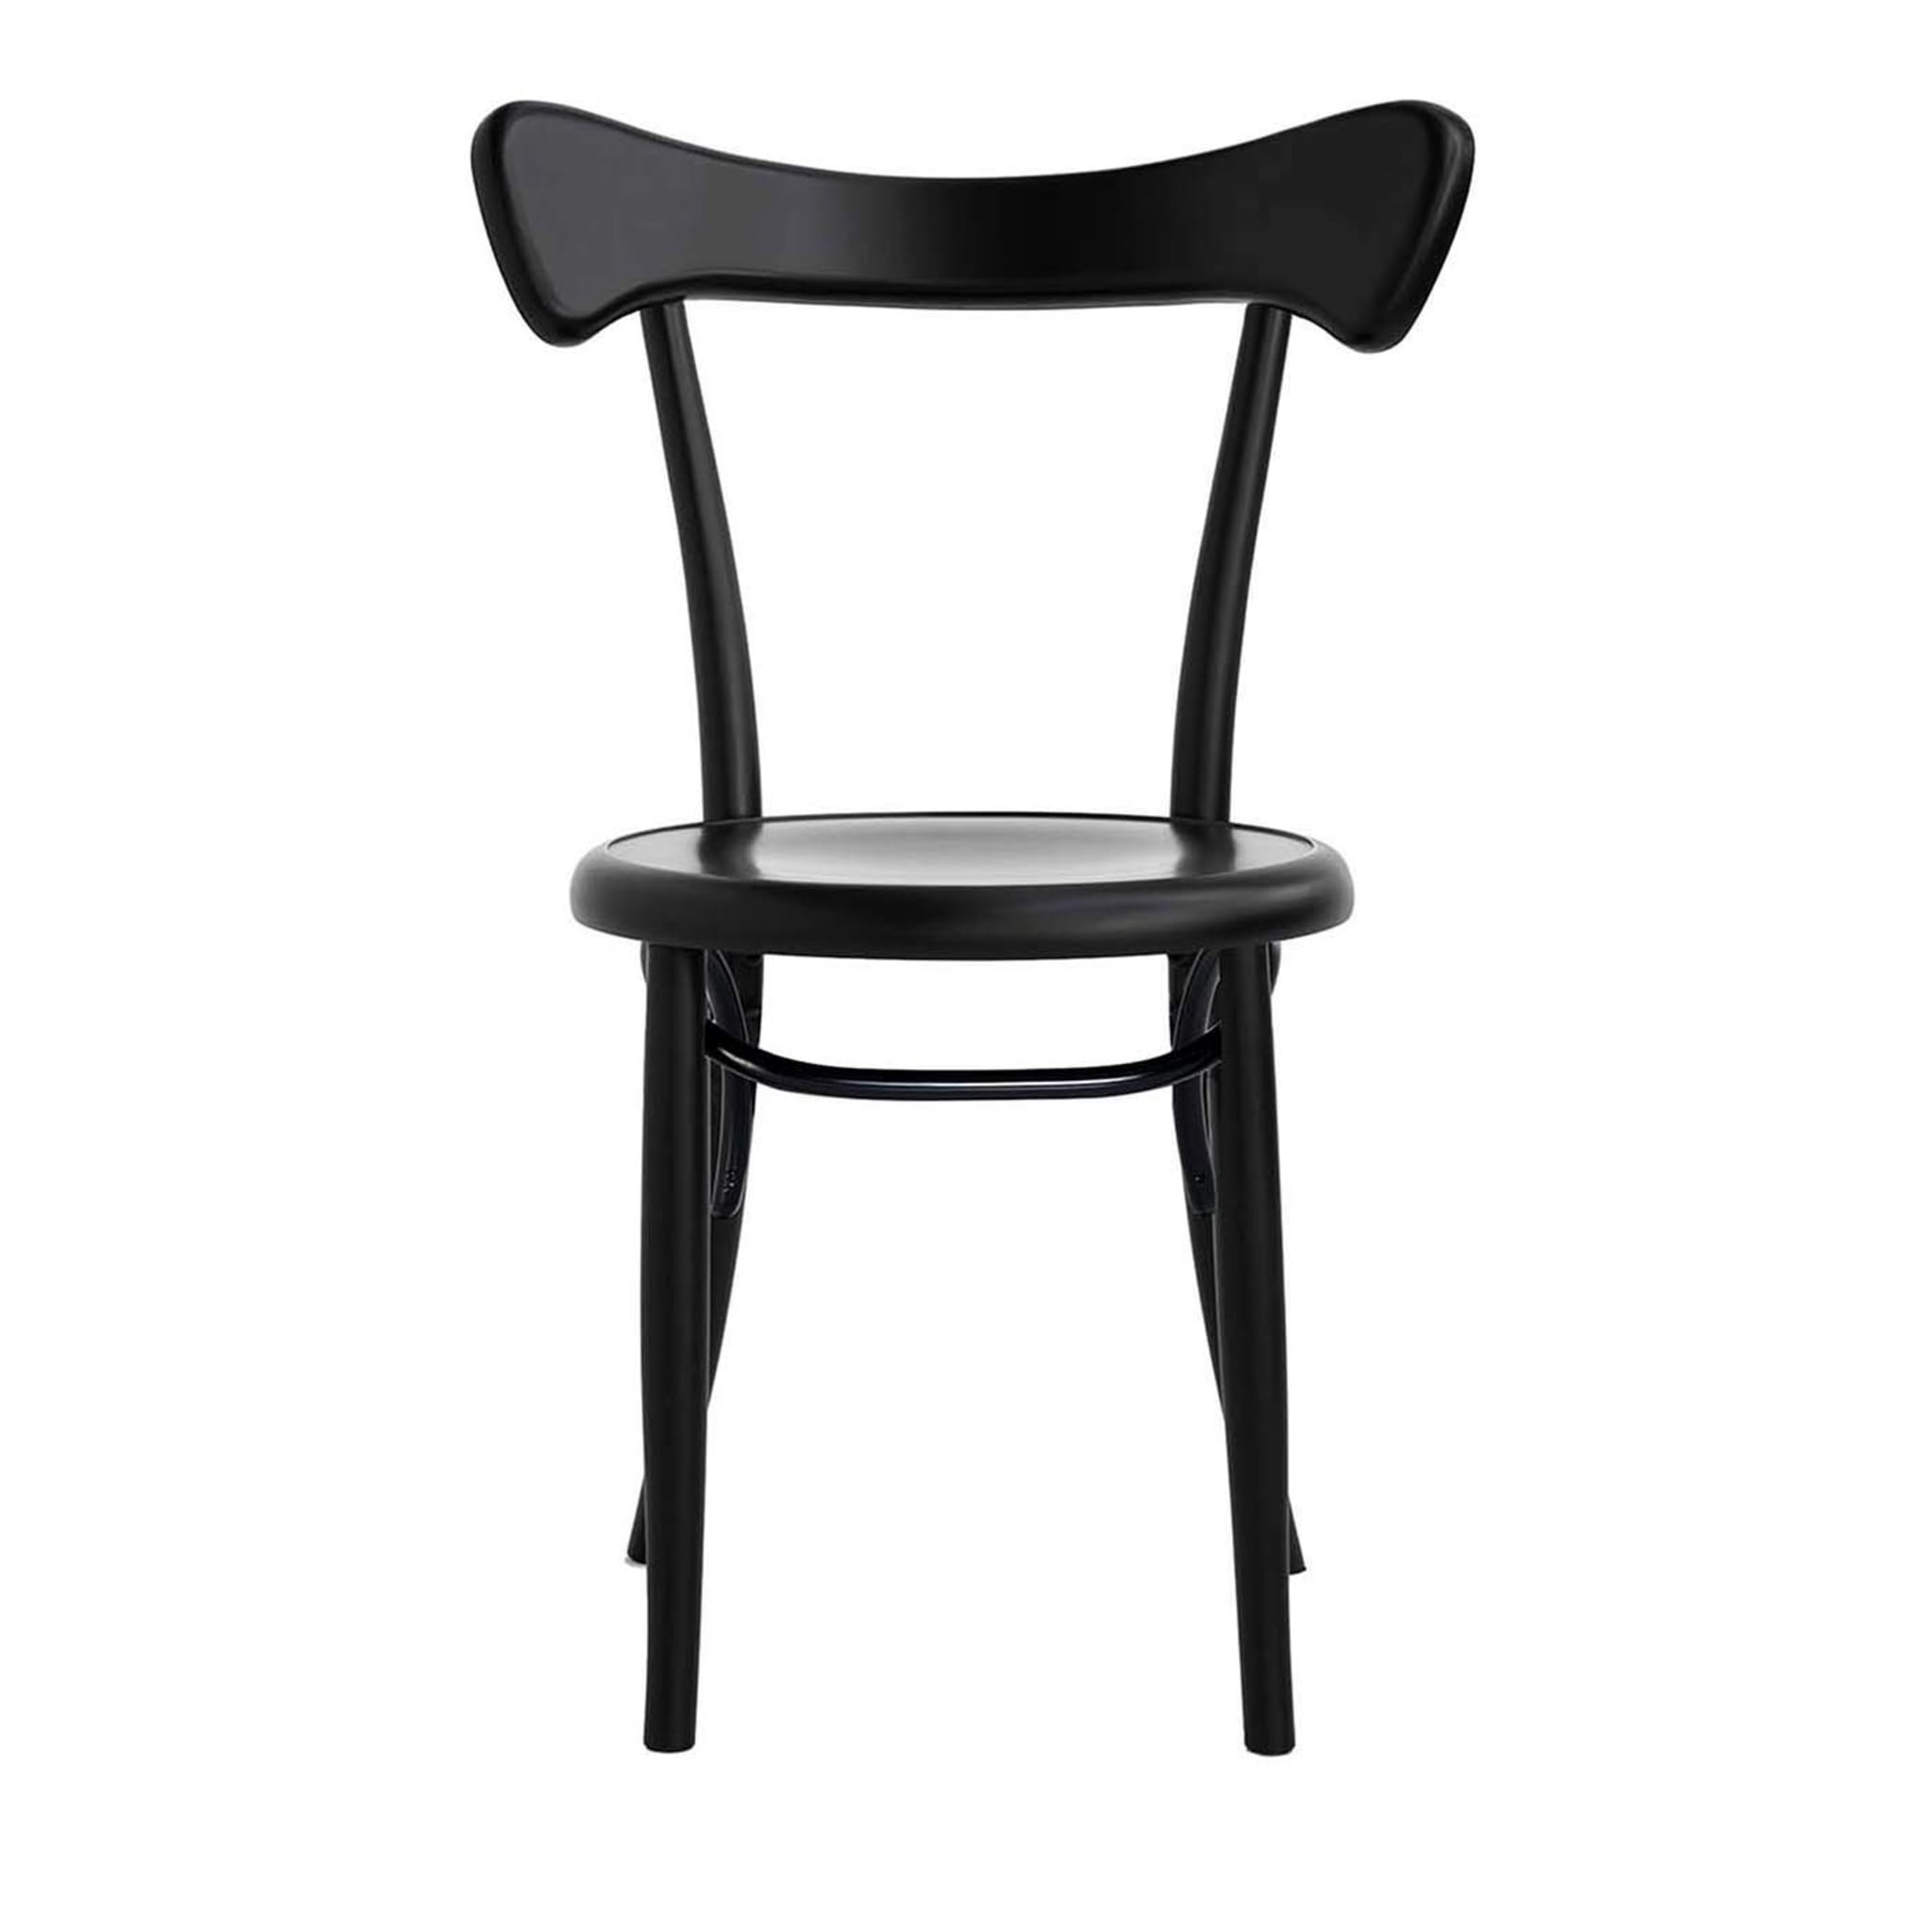 Cafestuhl Chair by Nigel Coates - Main view